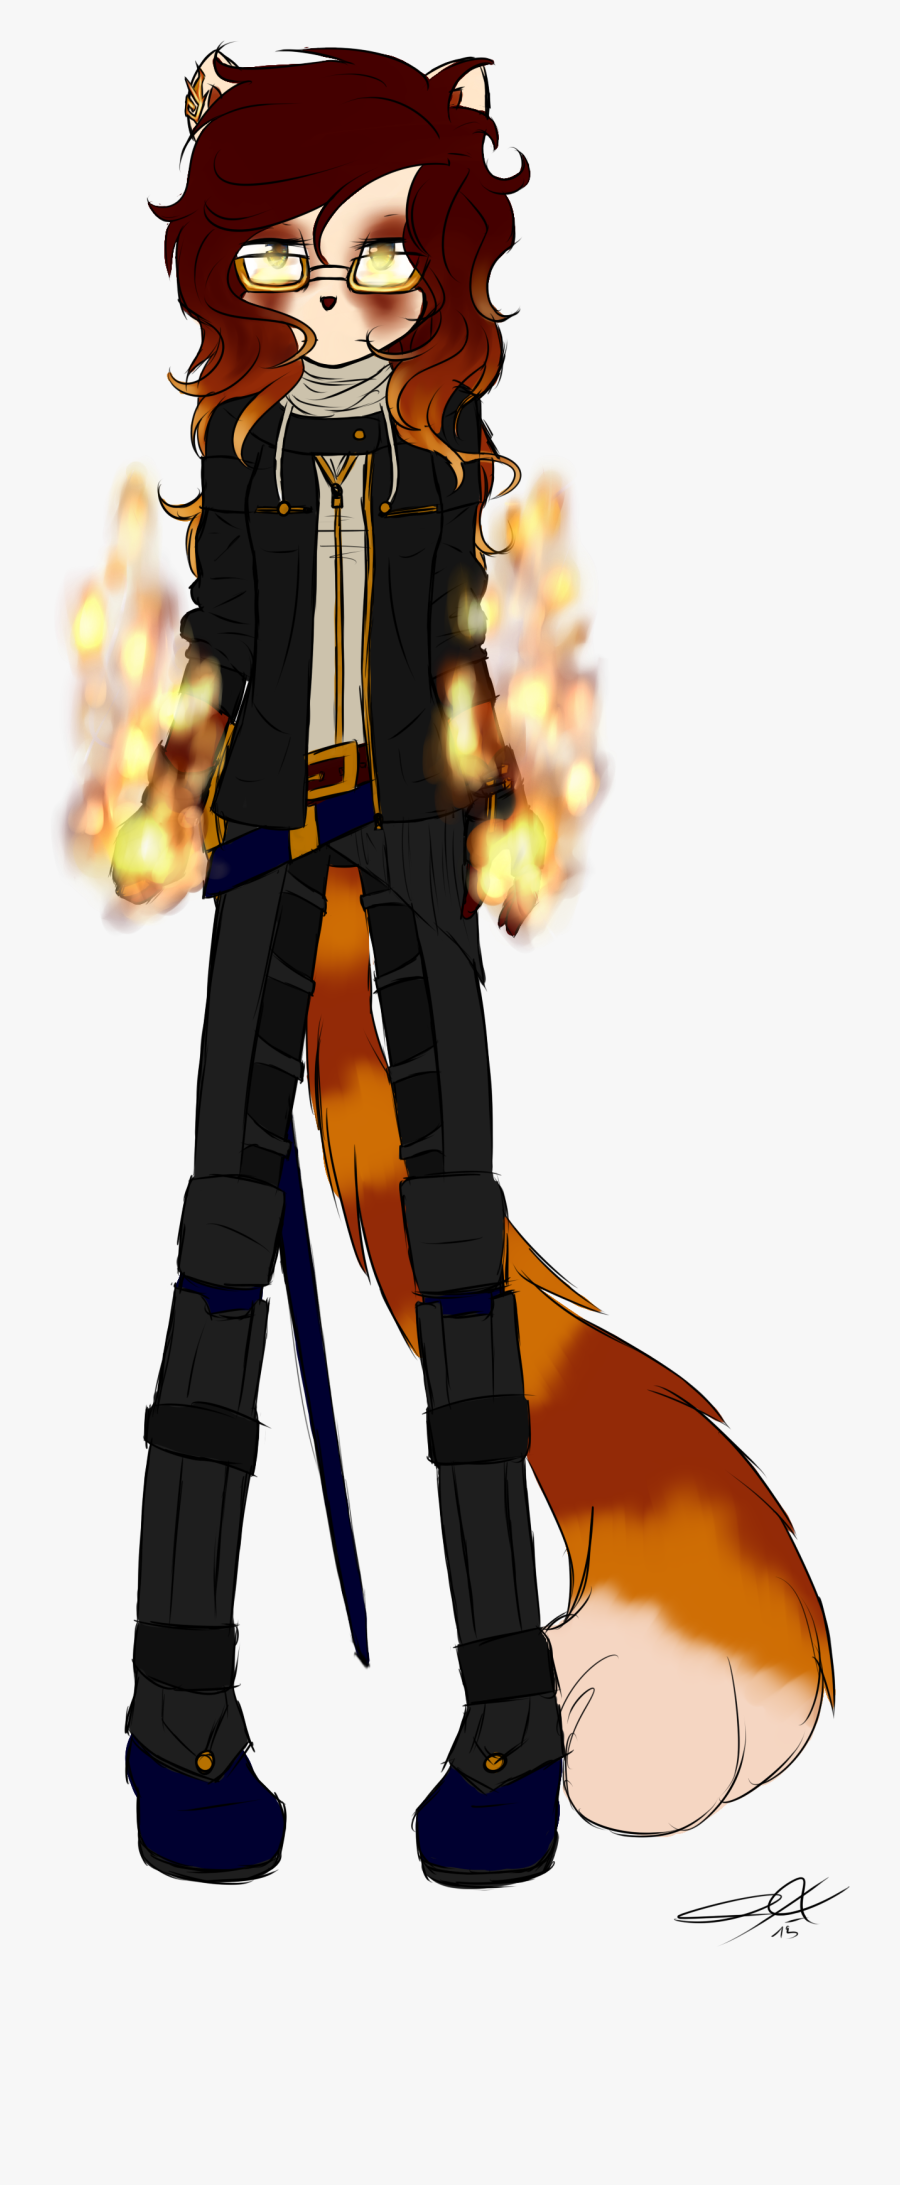 Feng The Red Panda - Illustration, Transparent Clipart